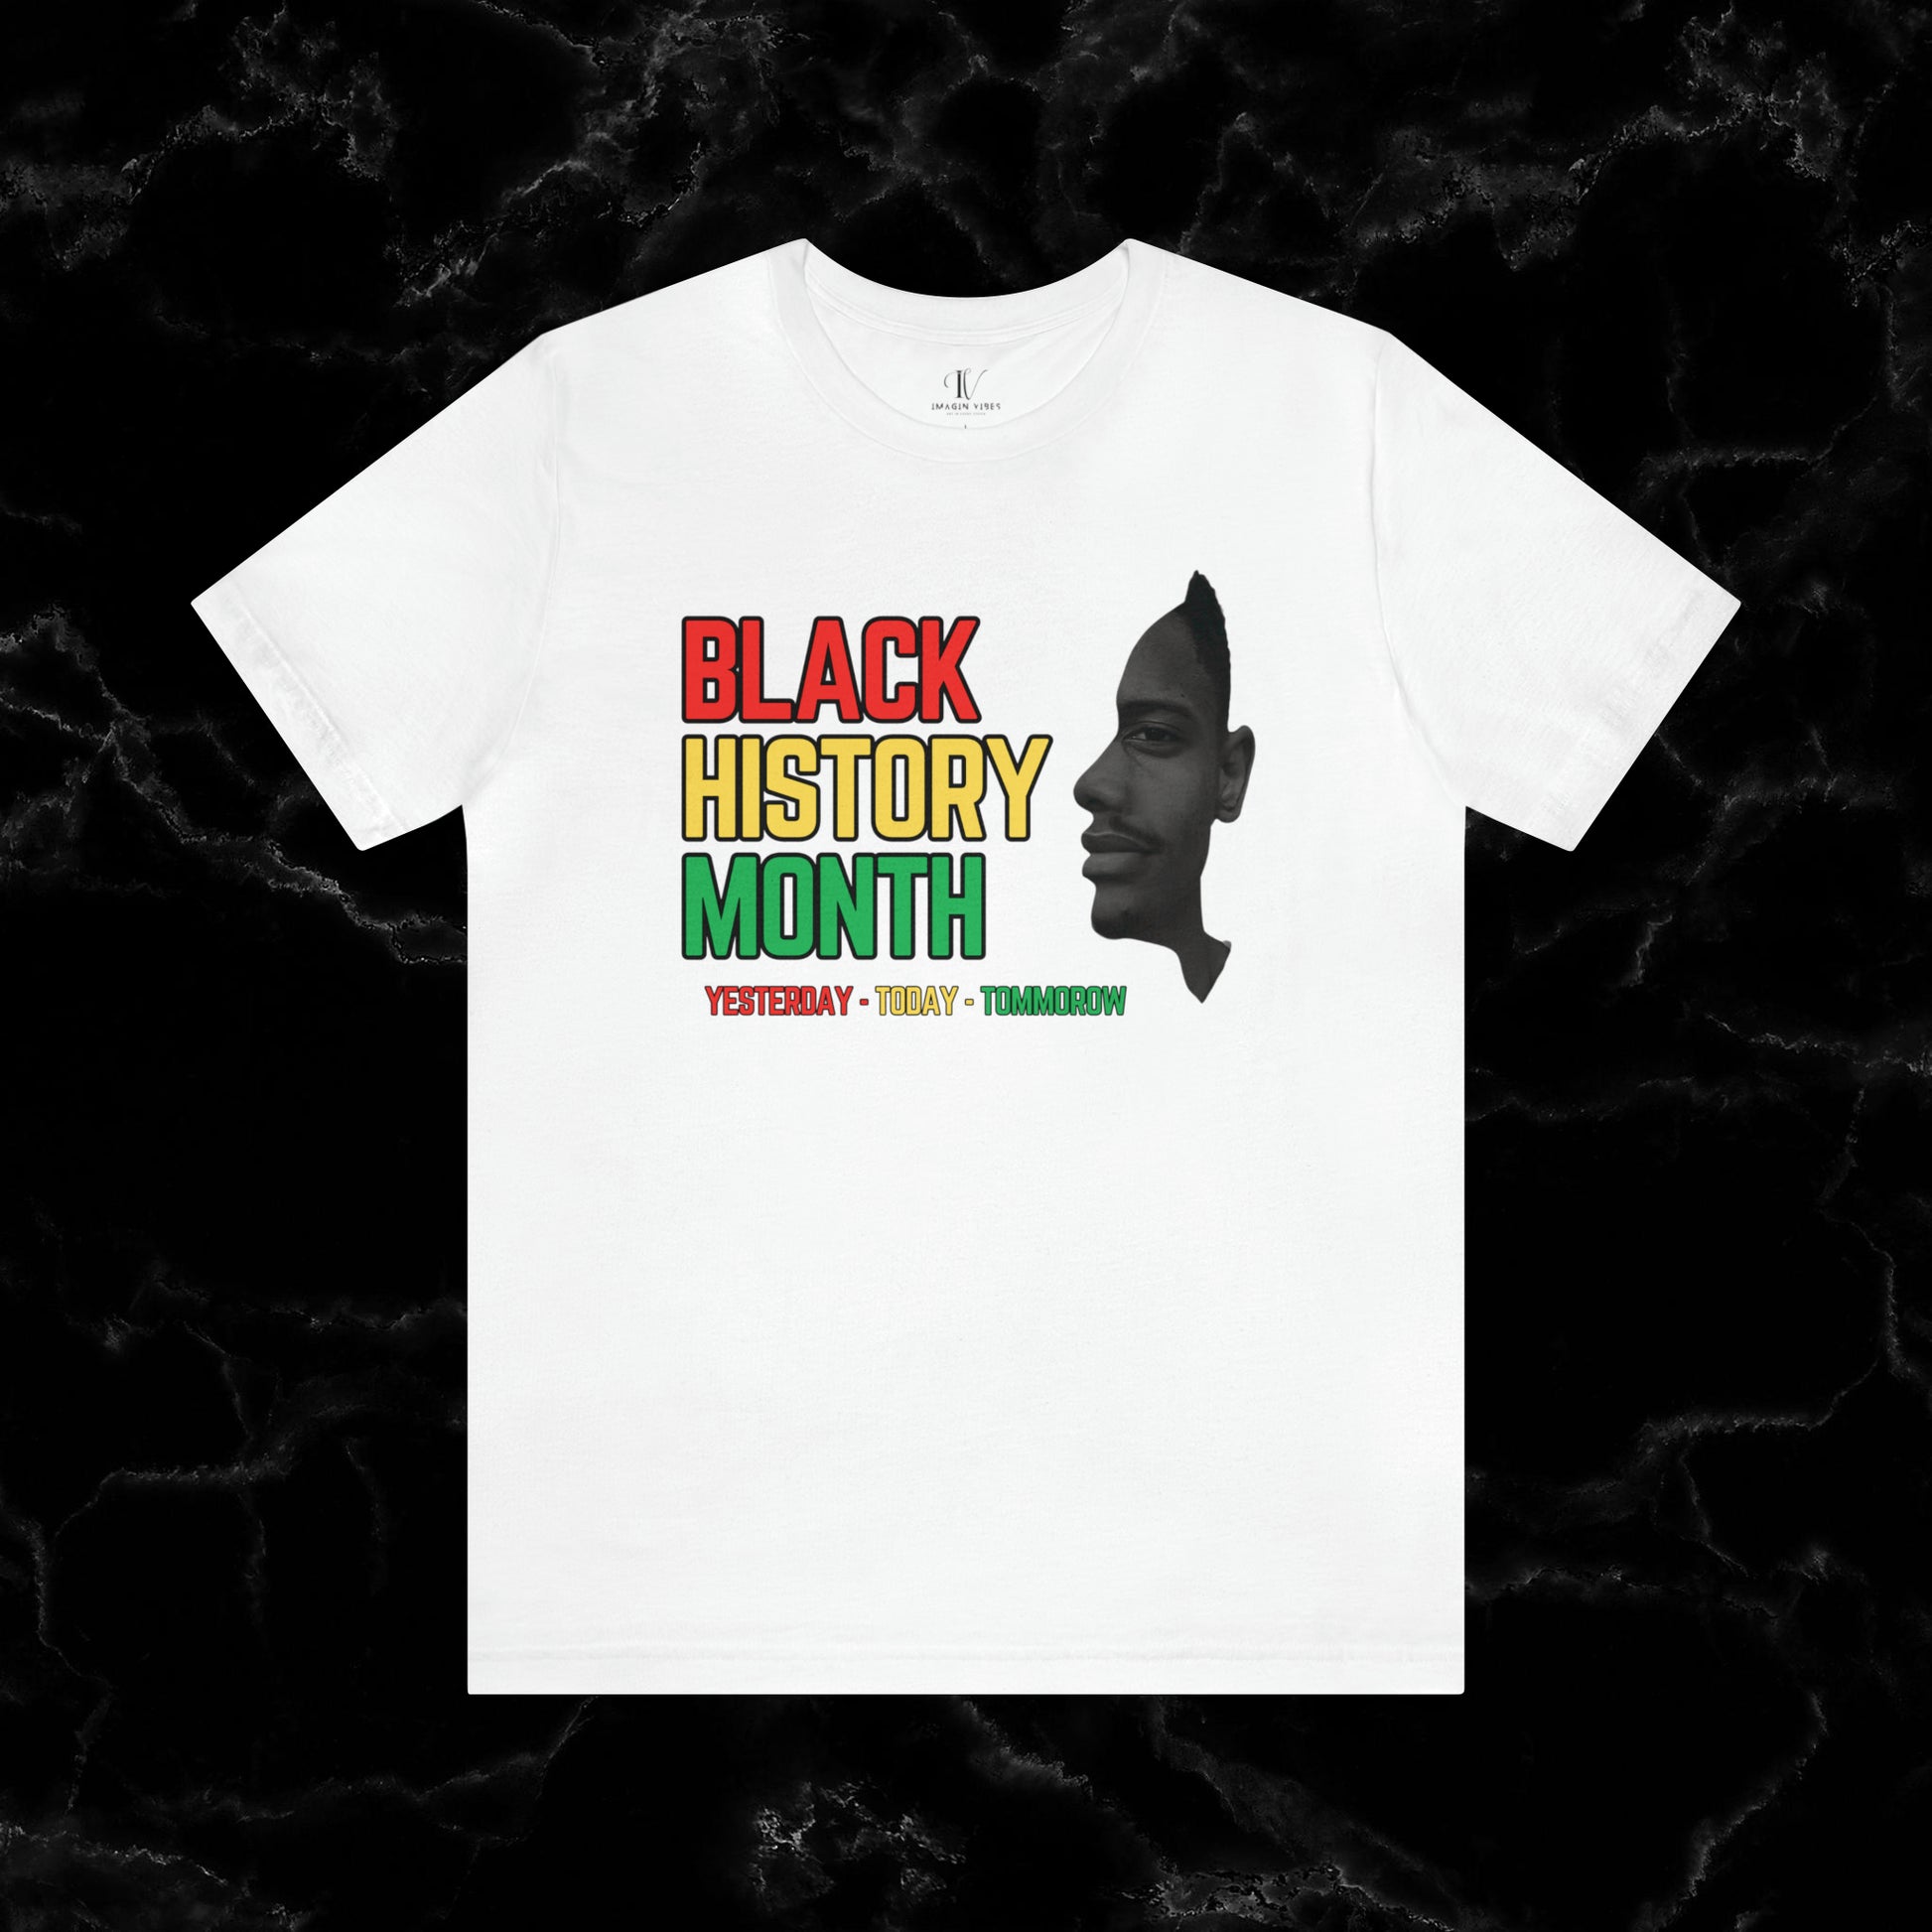 Empowering Black History Month Shirt - Yesterday, Today, Tomorrow - African American Pride T-Shirt White XS 